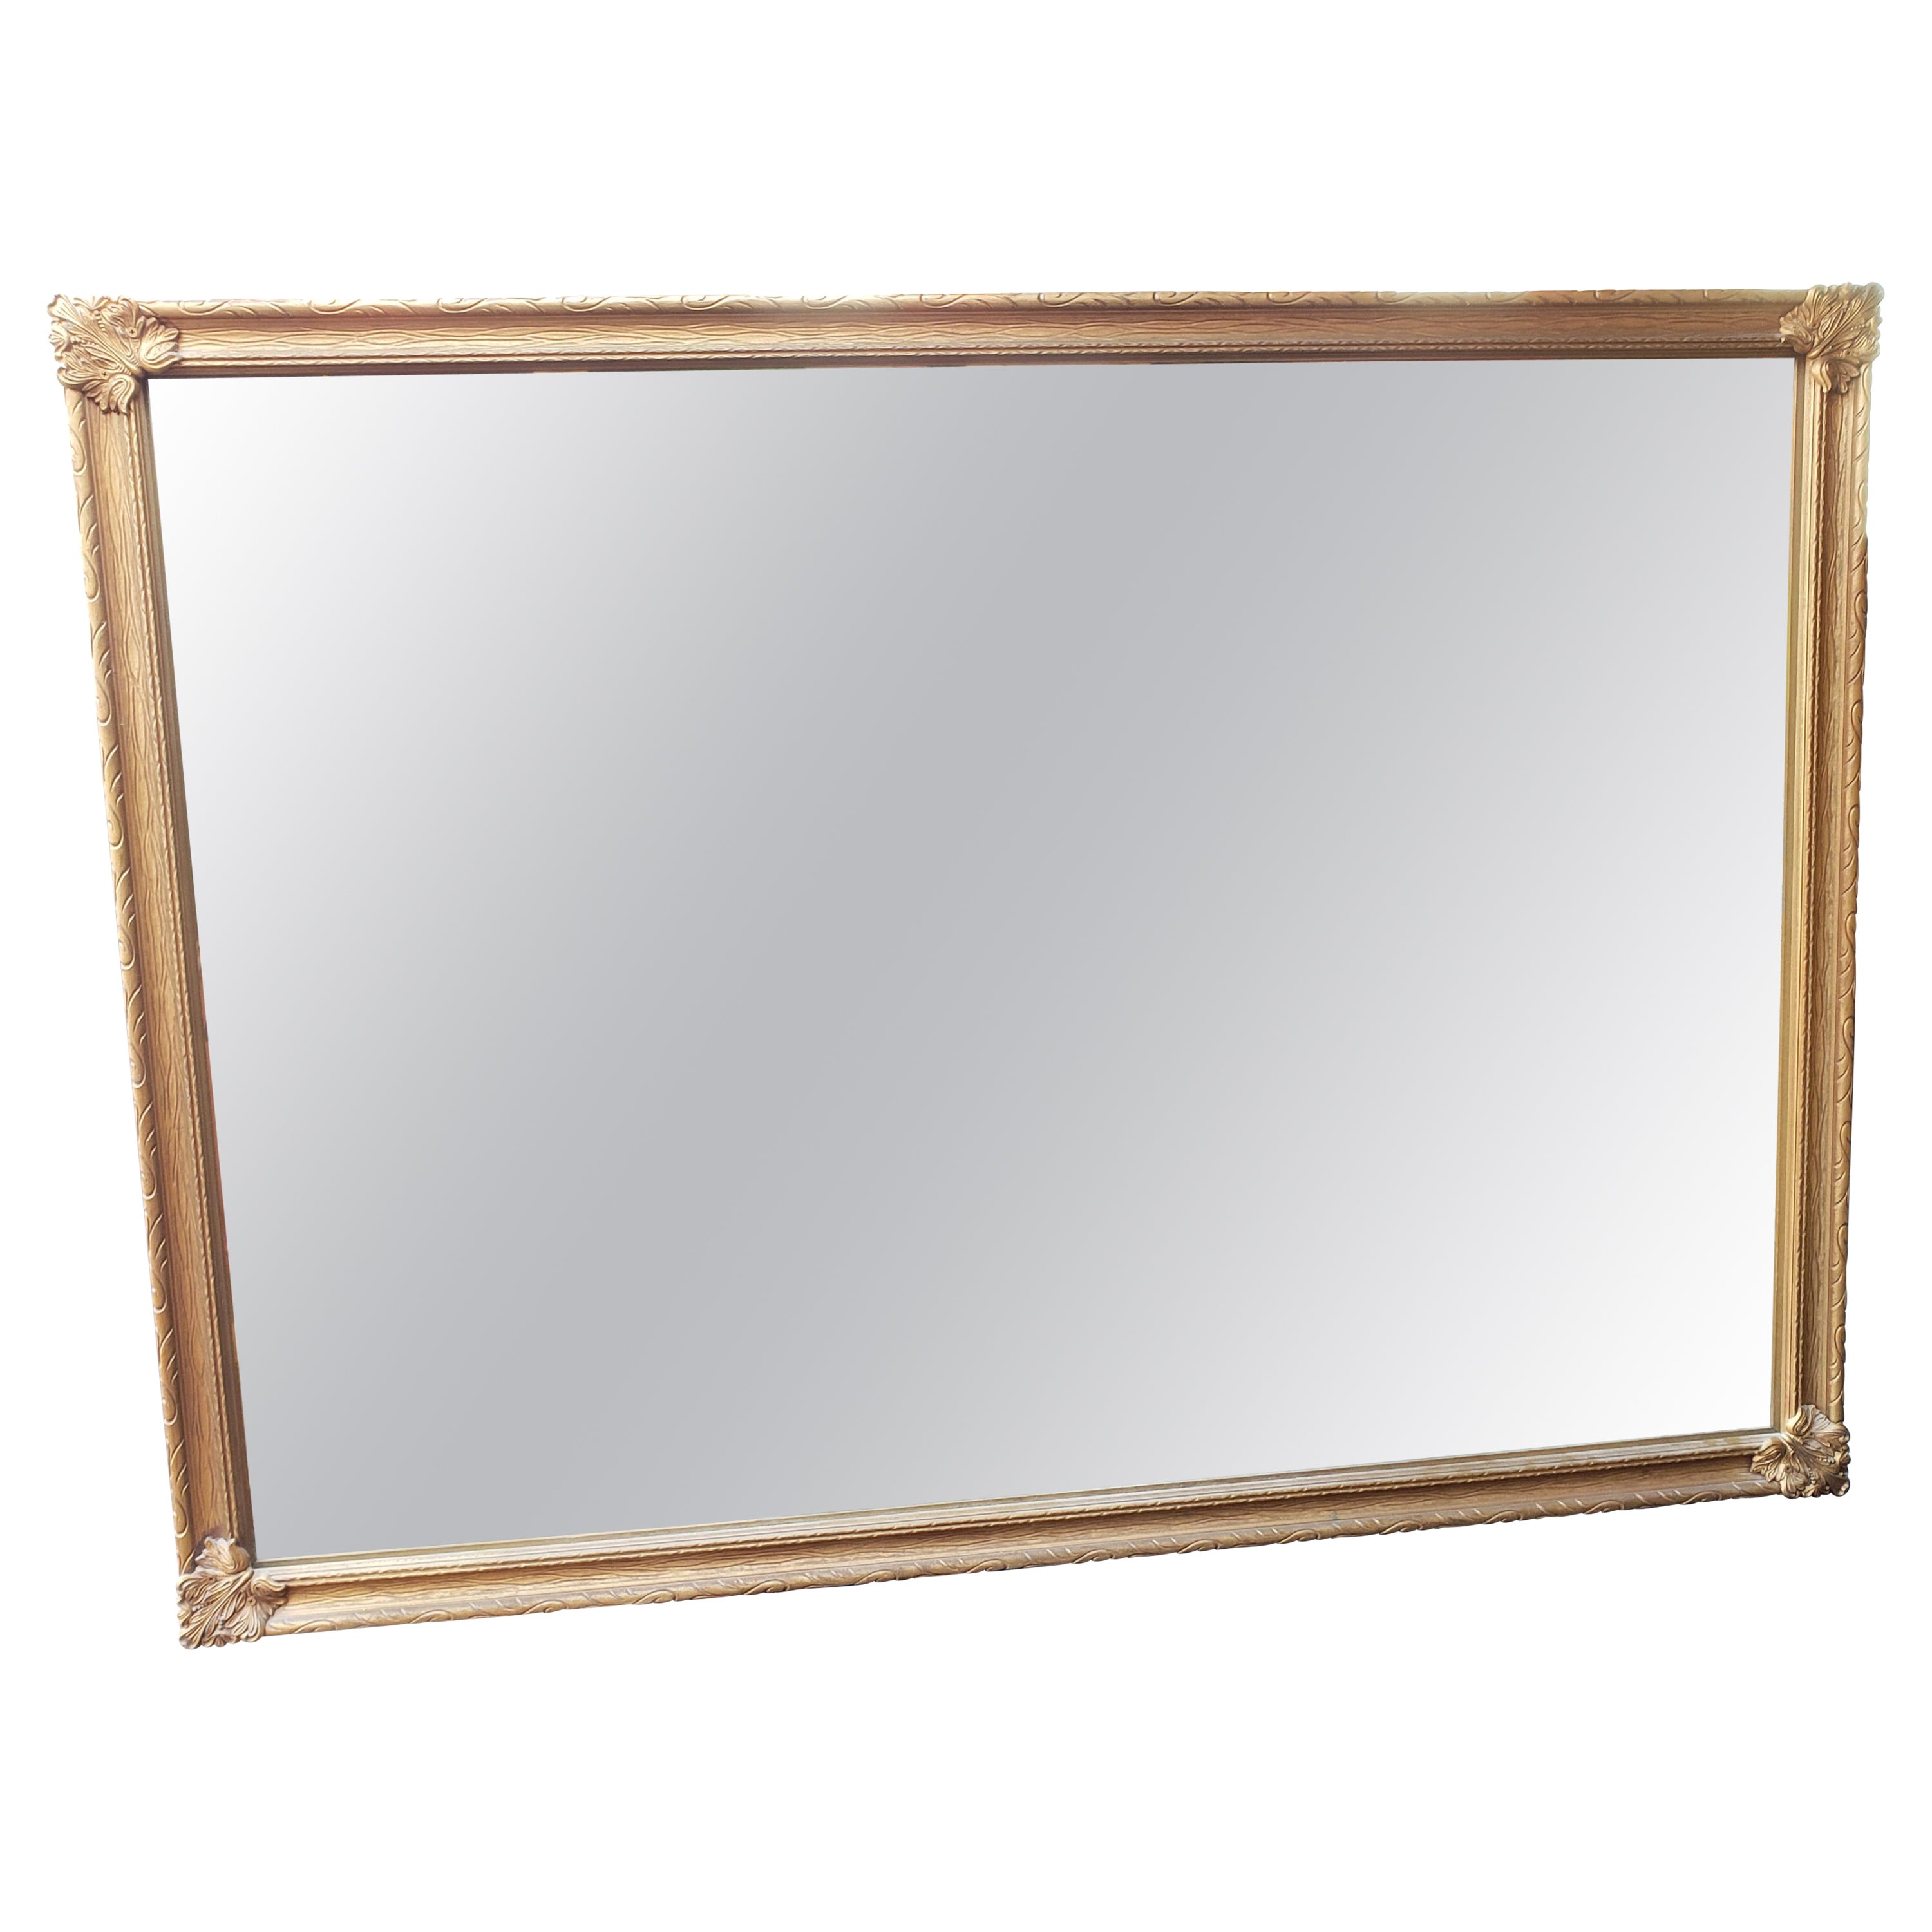 1970s Vintage Classical Giltwood and Brass Frame Mirror For Sale